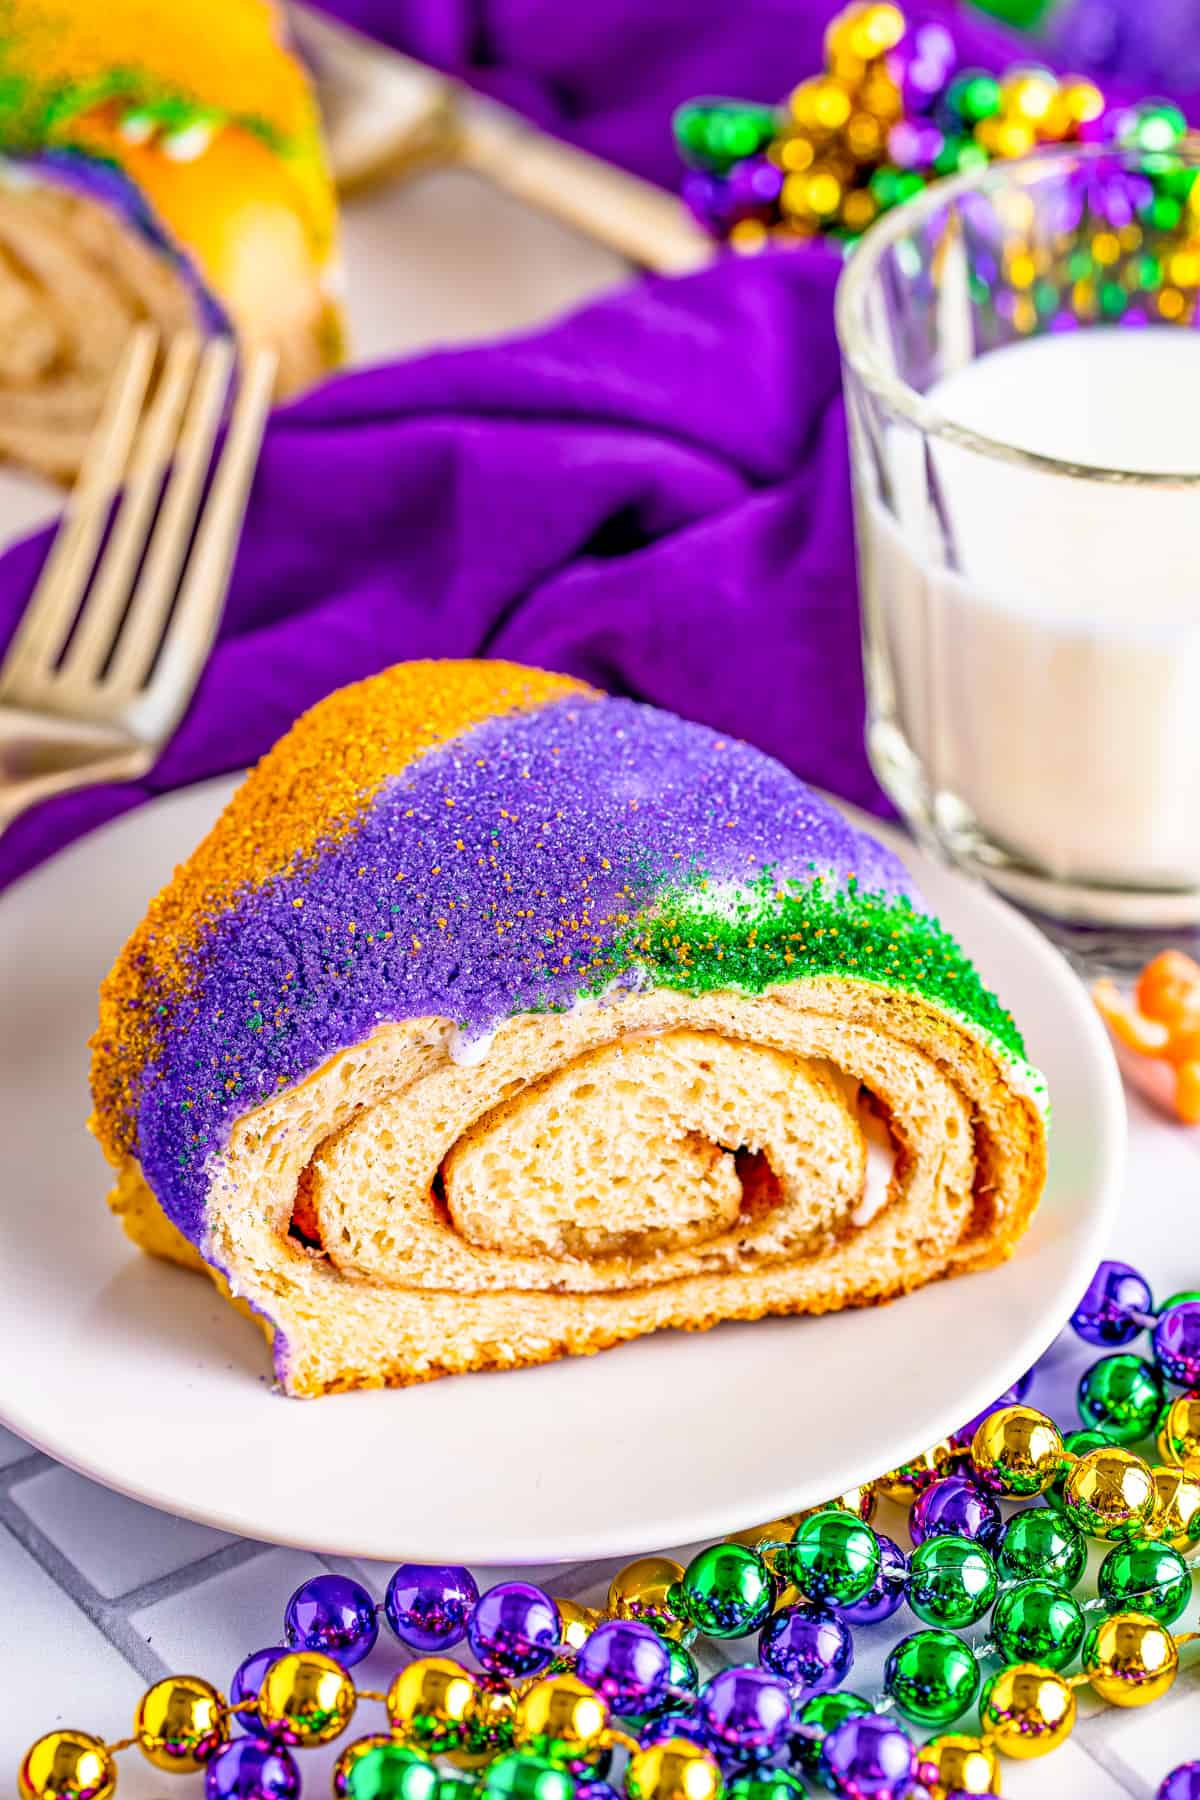 Slice of the King Cake Recipe on white plate showing topping and swirled inside surrounded by beads, milk and fork.